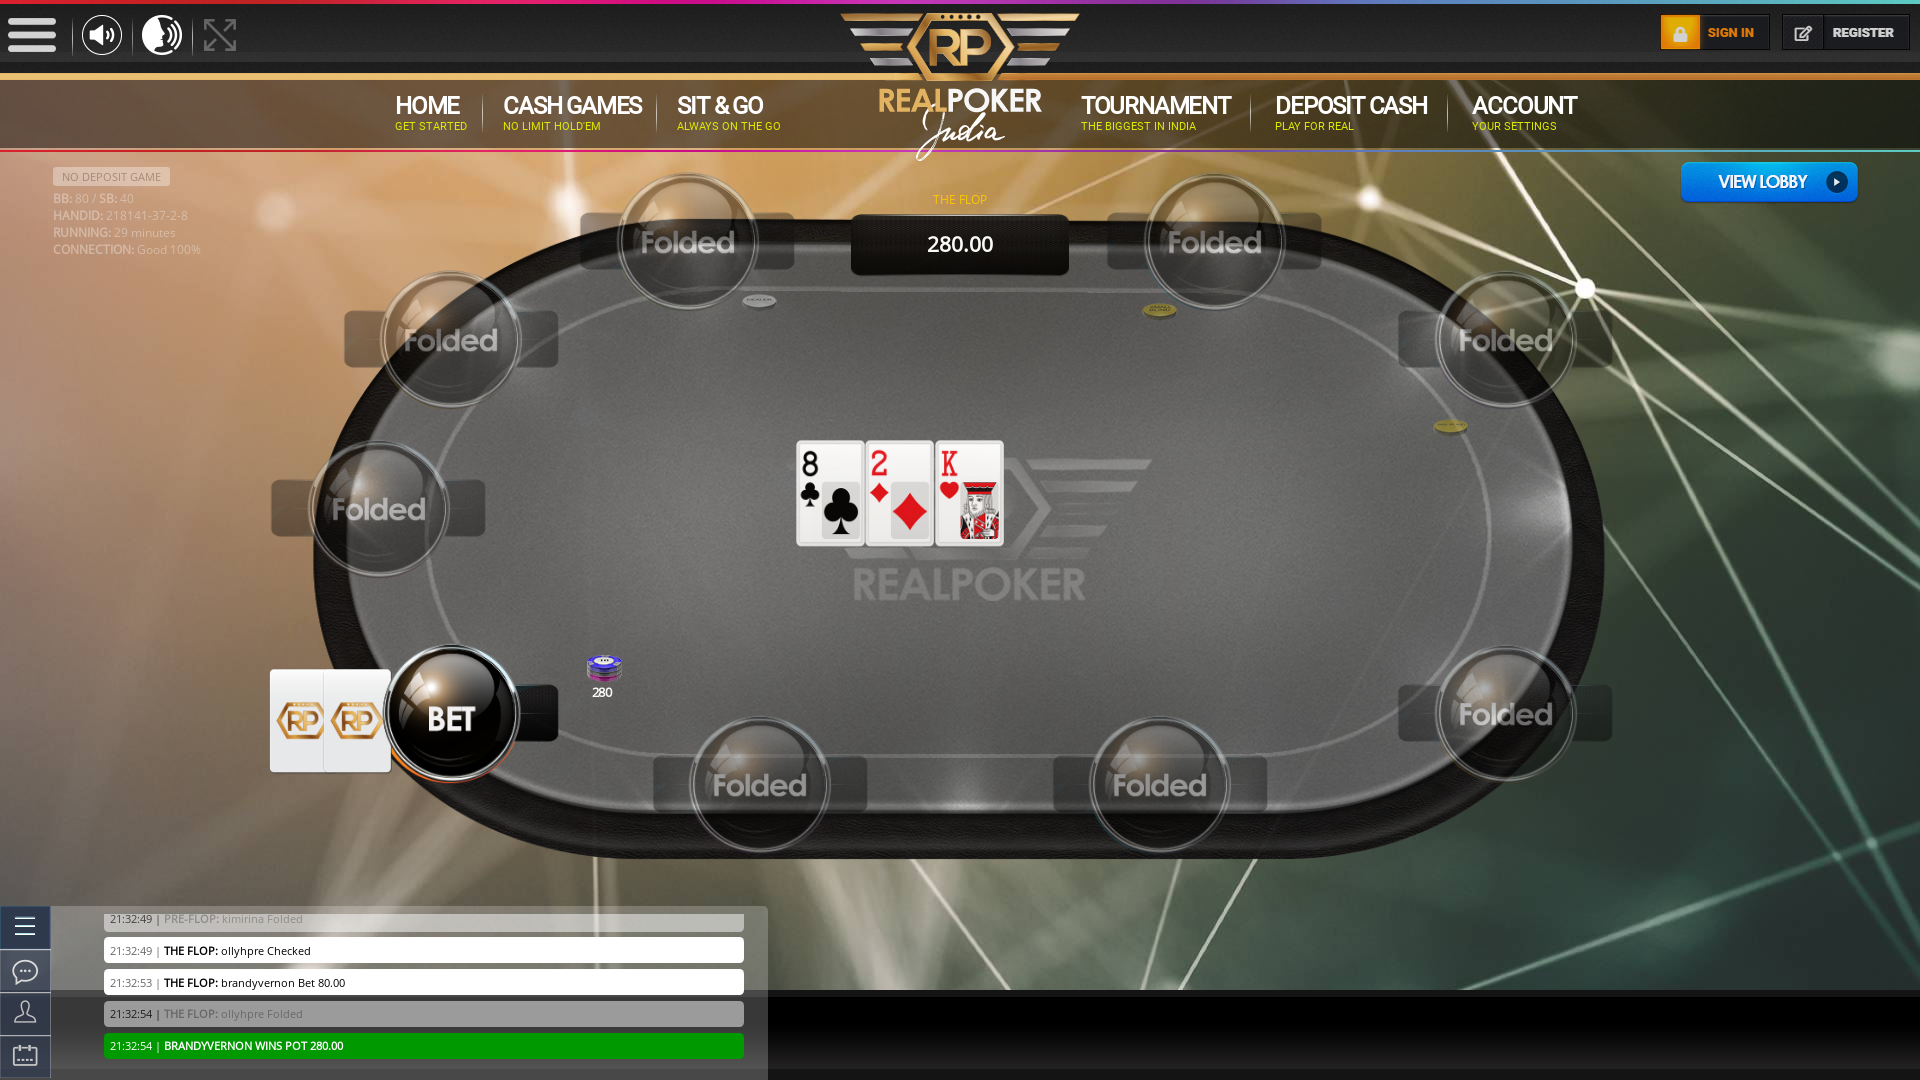 Real Indian poker on a 10 player table in the 29th minute of the game